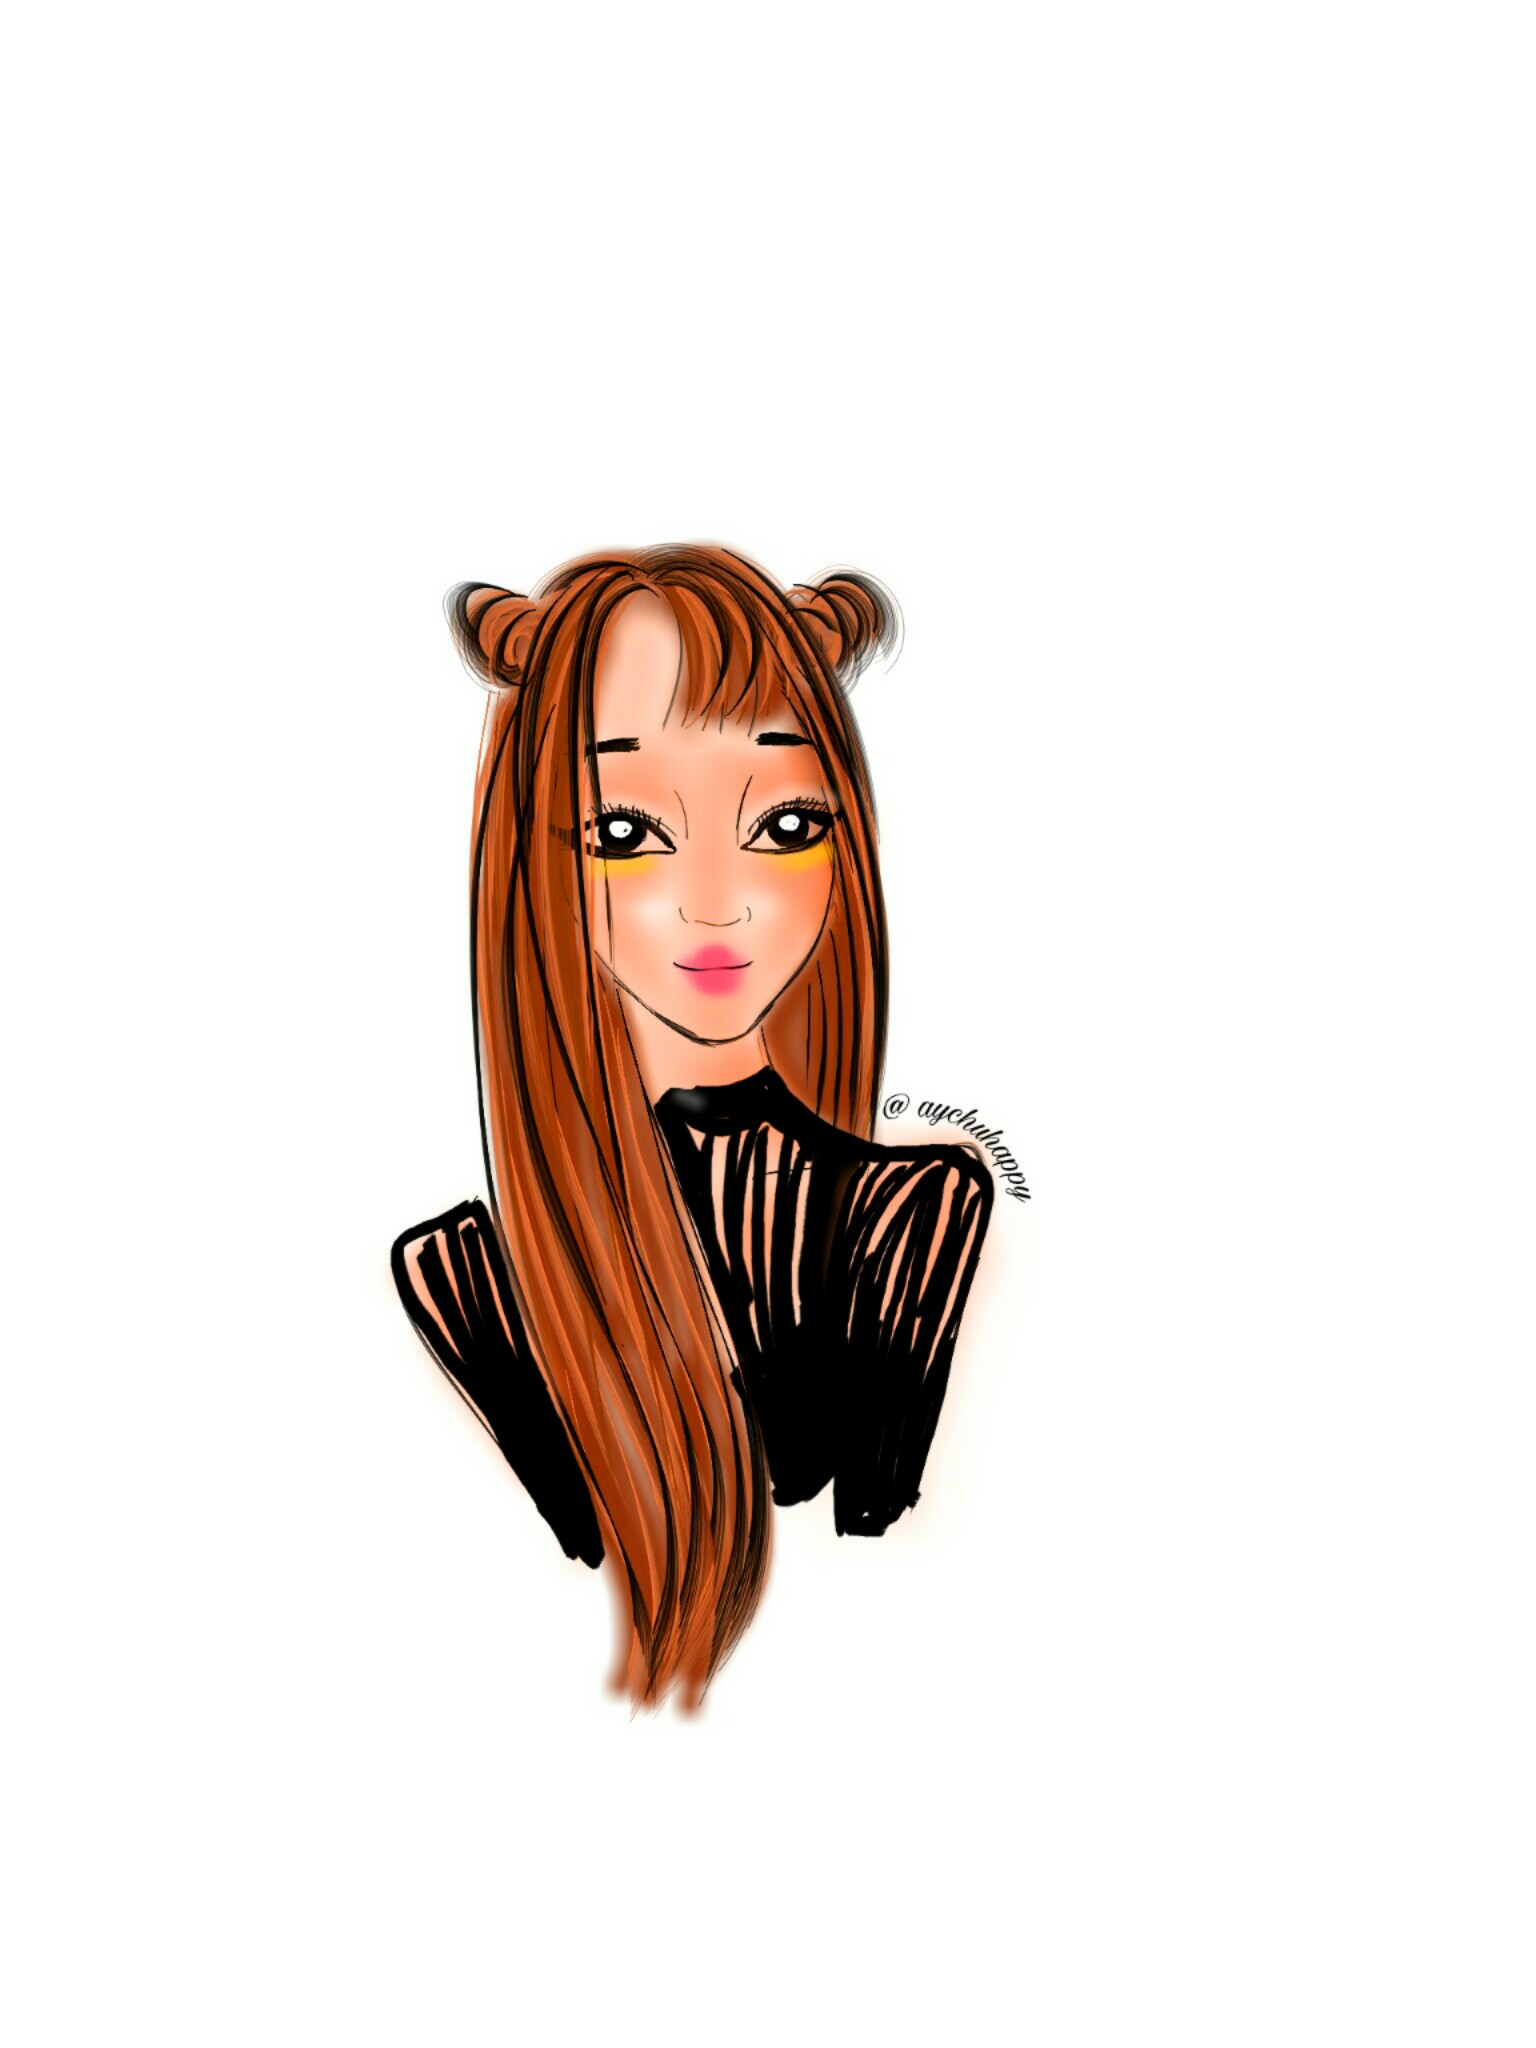 freetoedit drawing hair hairstyle image by @aychuhappy